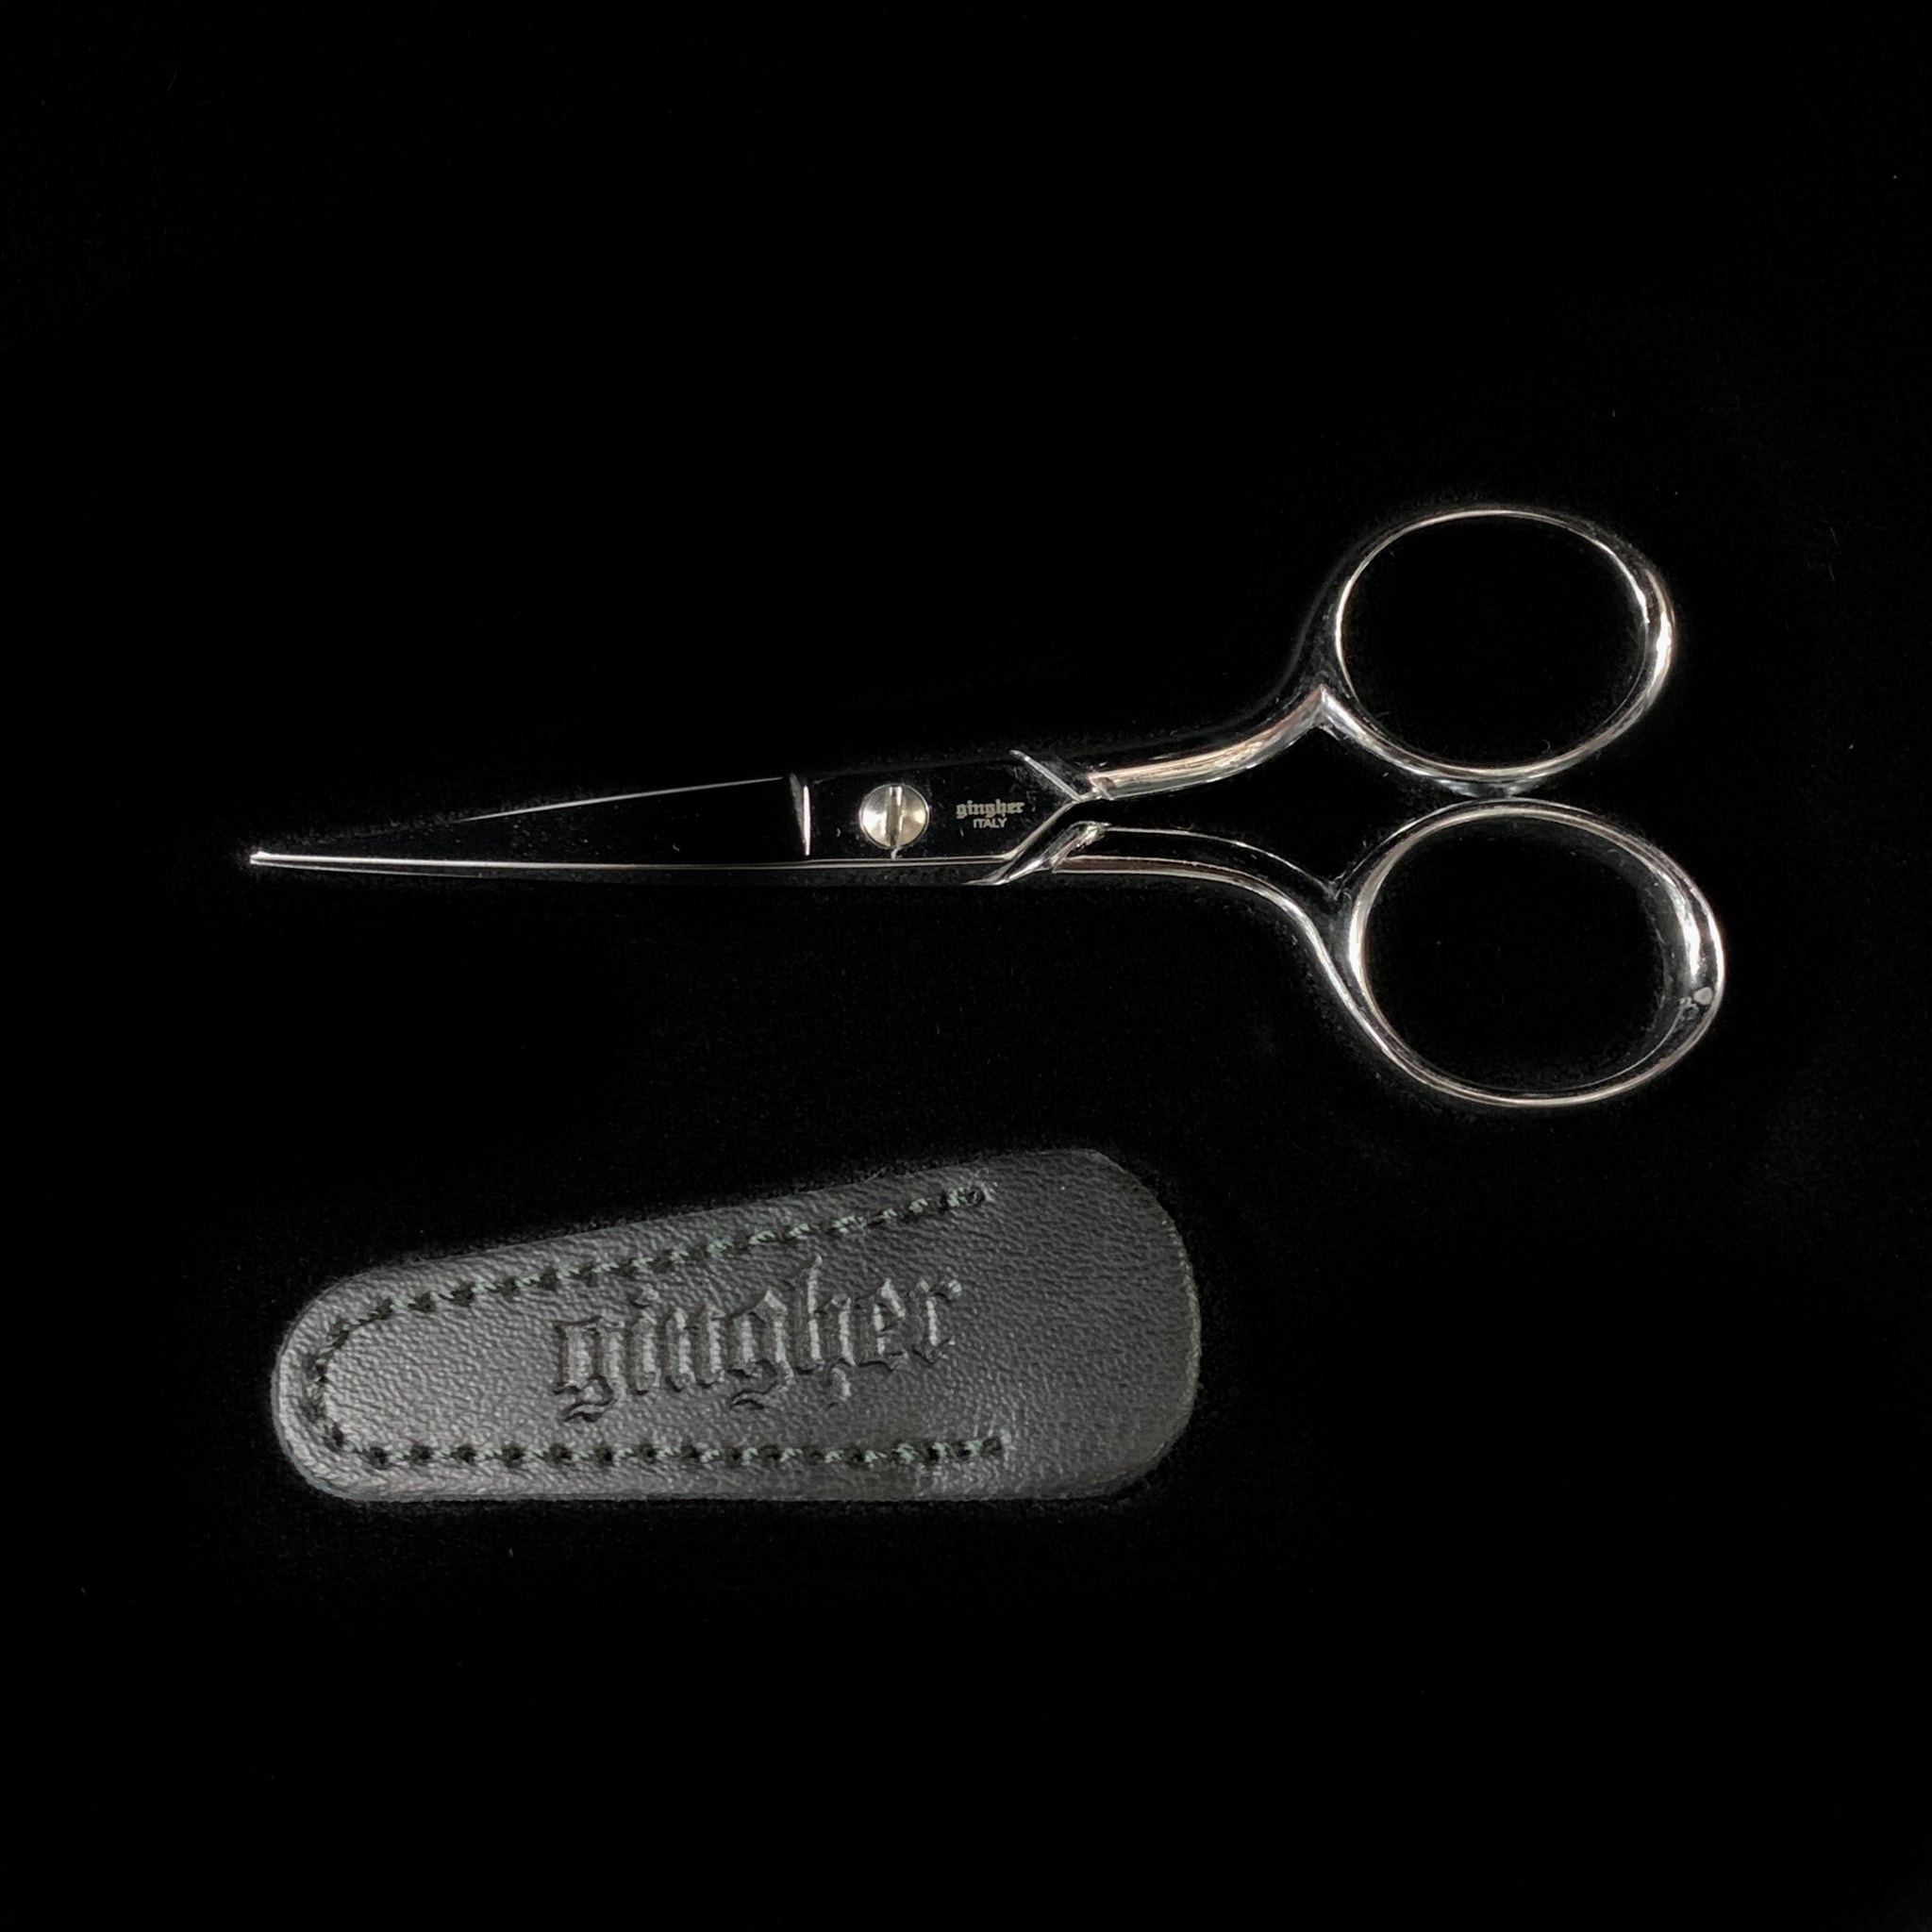 Gingher 4 Embroidery Scissors